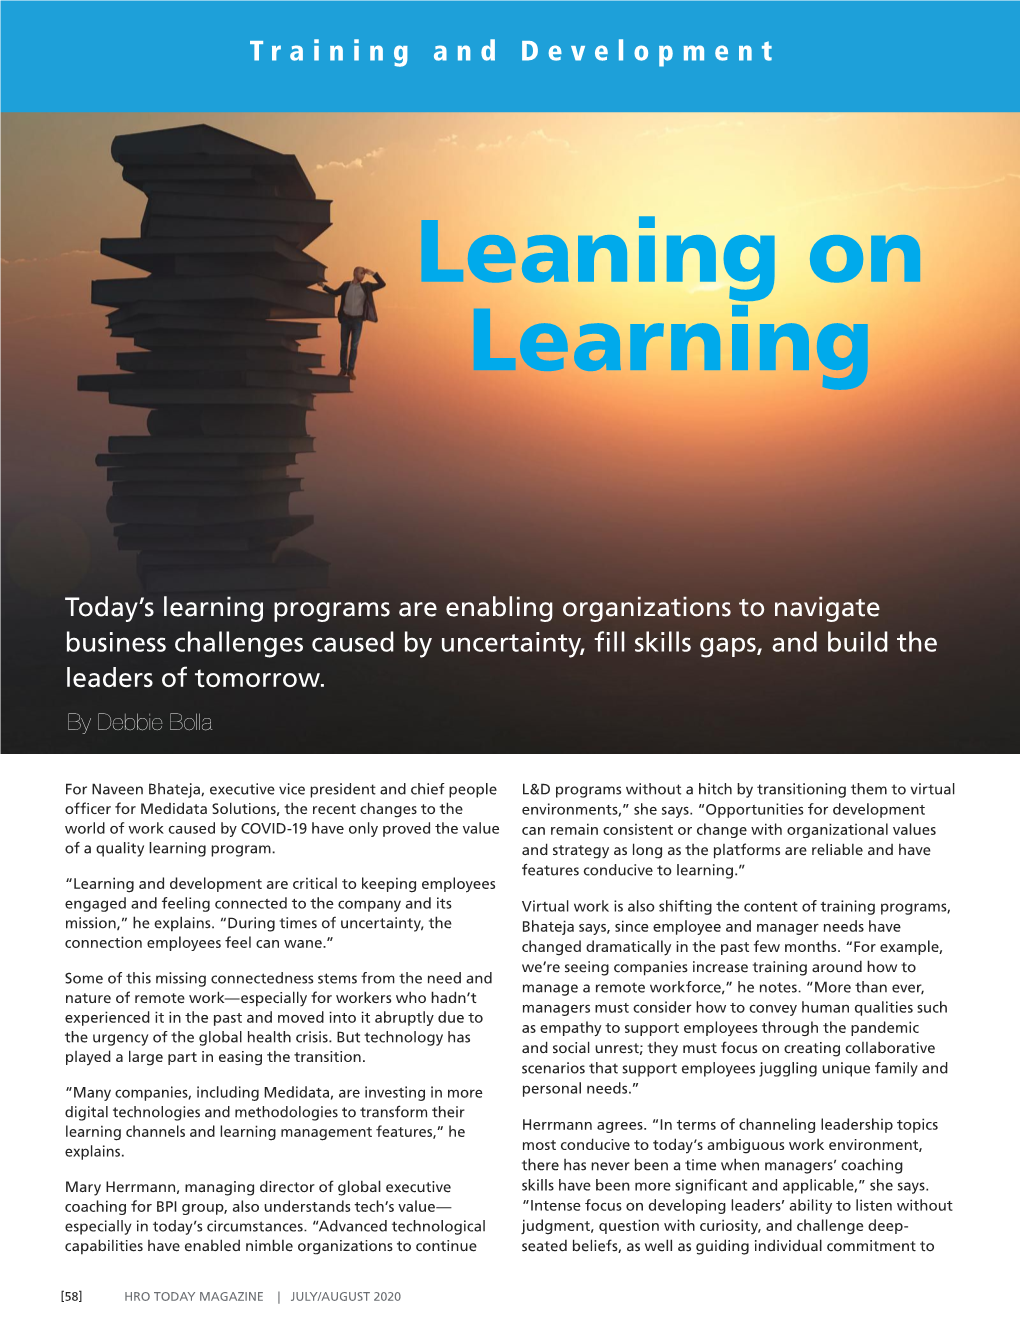 Leaning on Learning